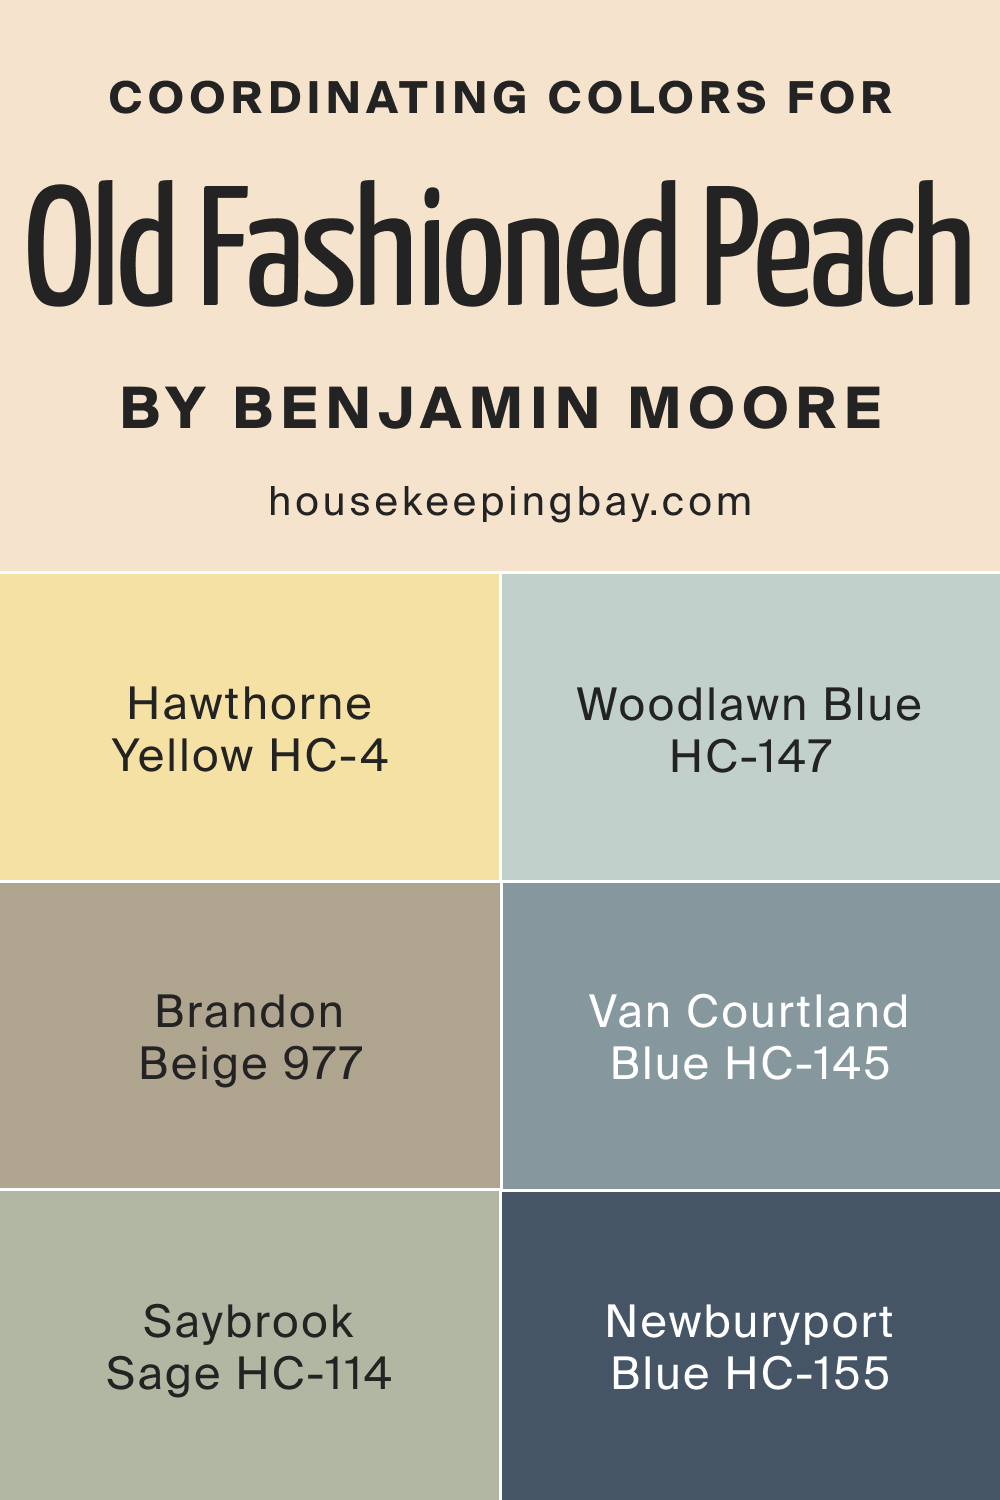 Coordinating Colors for Old Fashioned Peach OC 79 by Benjamin Moore